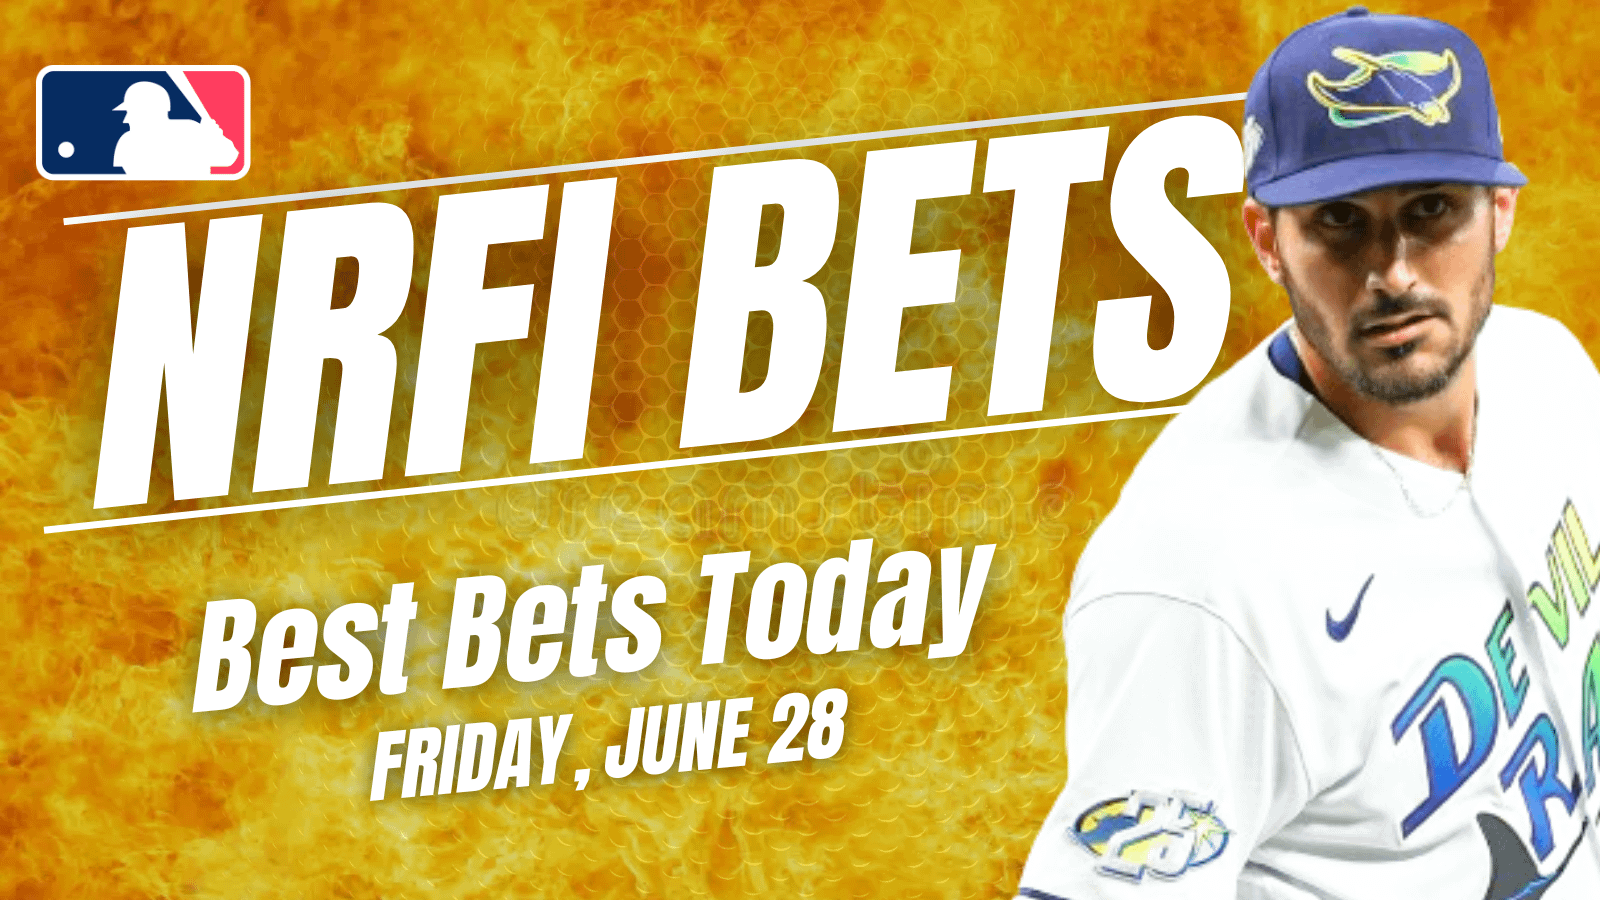 Get the best NRFI bets for today: Here are the top no run first inning picks, predictions and prop bets for Friday, June 28 ...